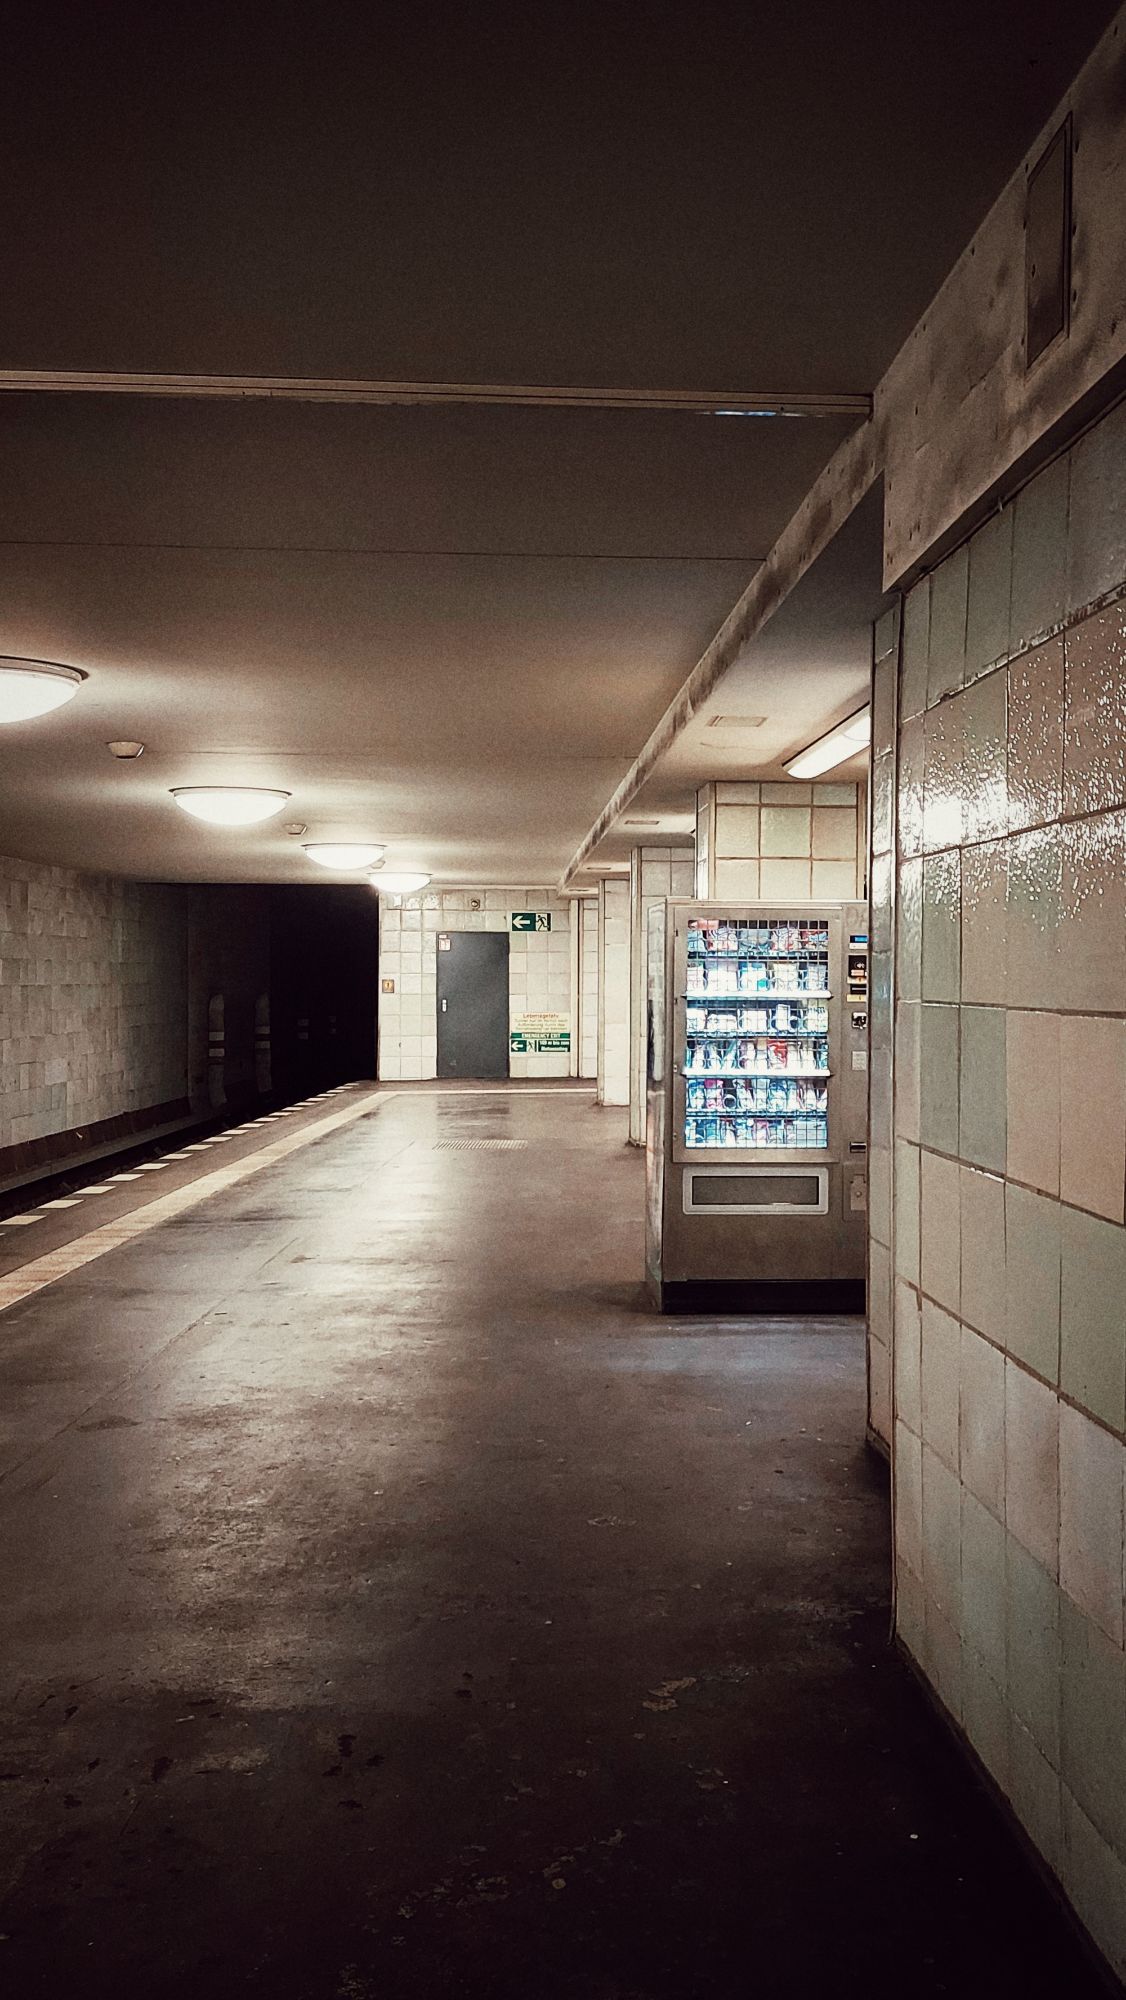 A snack vending machine in an empty subway station